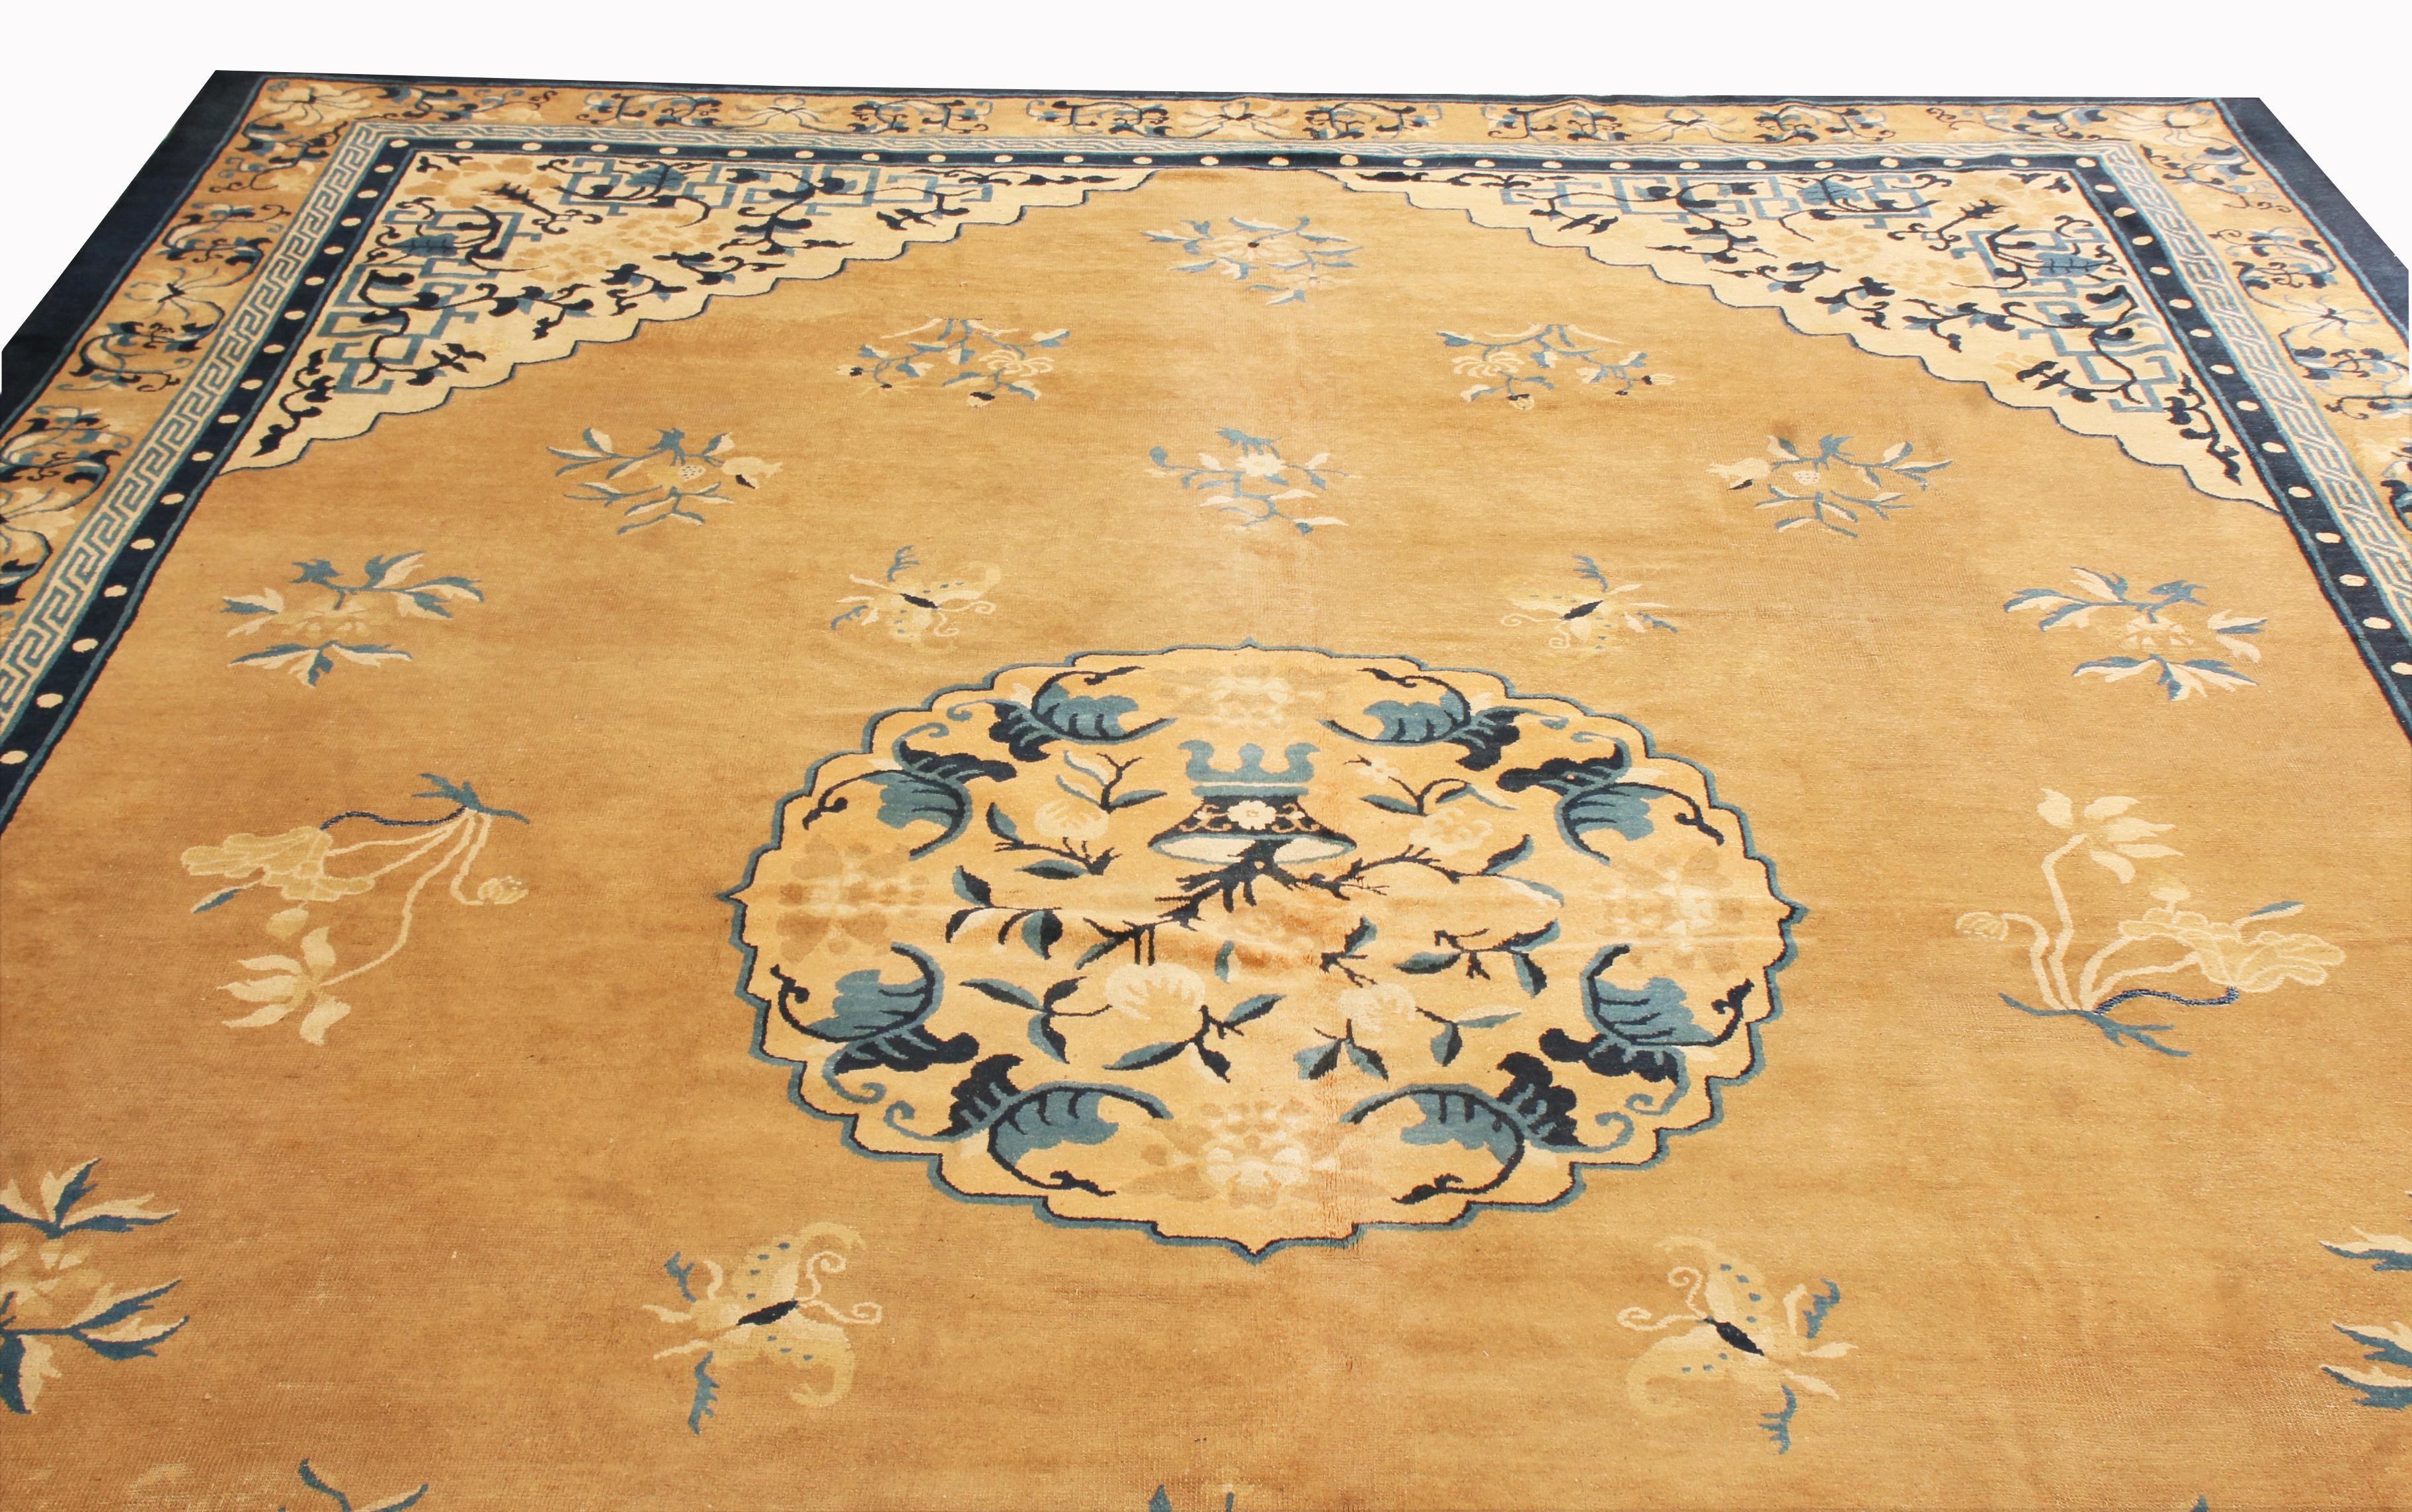 Originating from China in 1910, this antique Peking rug enjoys a rich and varied combination of ornate colourways with Art Deco reminiscent floral patterns. Hand knotted in high quality wool, the medallion field design depicts a highly stylized